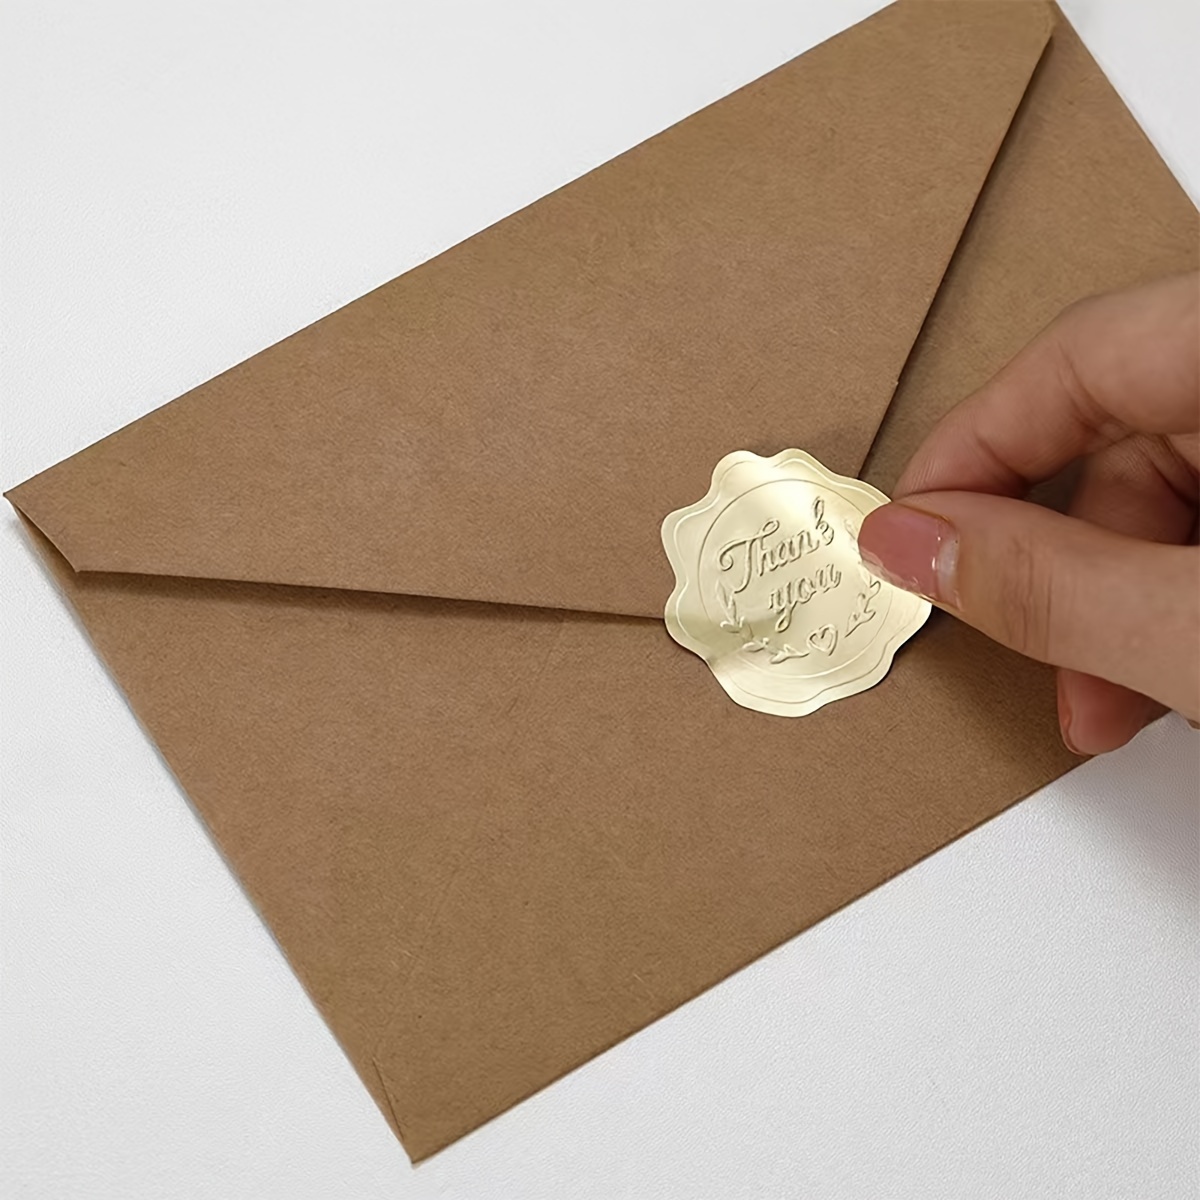 Everlasting Star 300pcs Gold Embossed Wax Seal Heart Shape Envelope Seals Stickers for Wedding Invitations,Party Favors,Greeting Cards, DIY